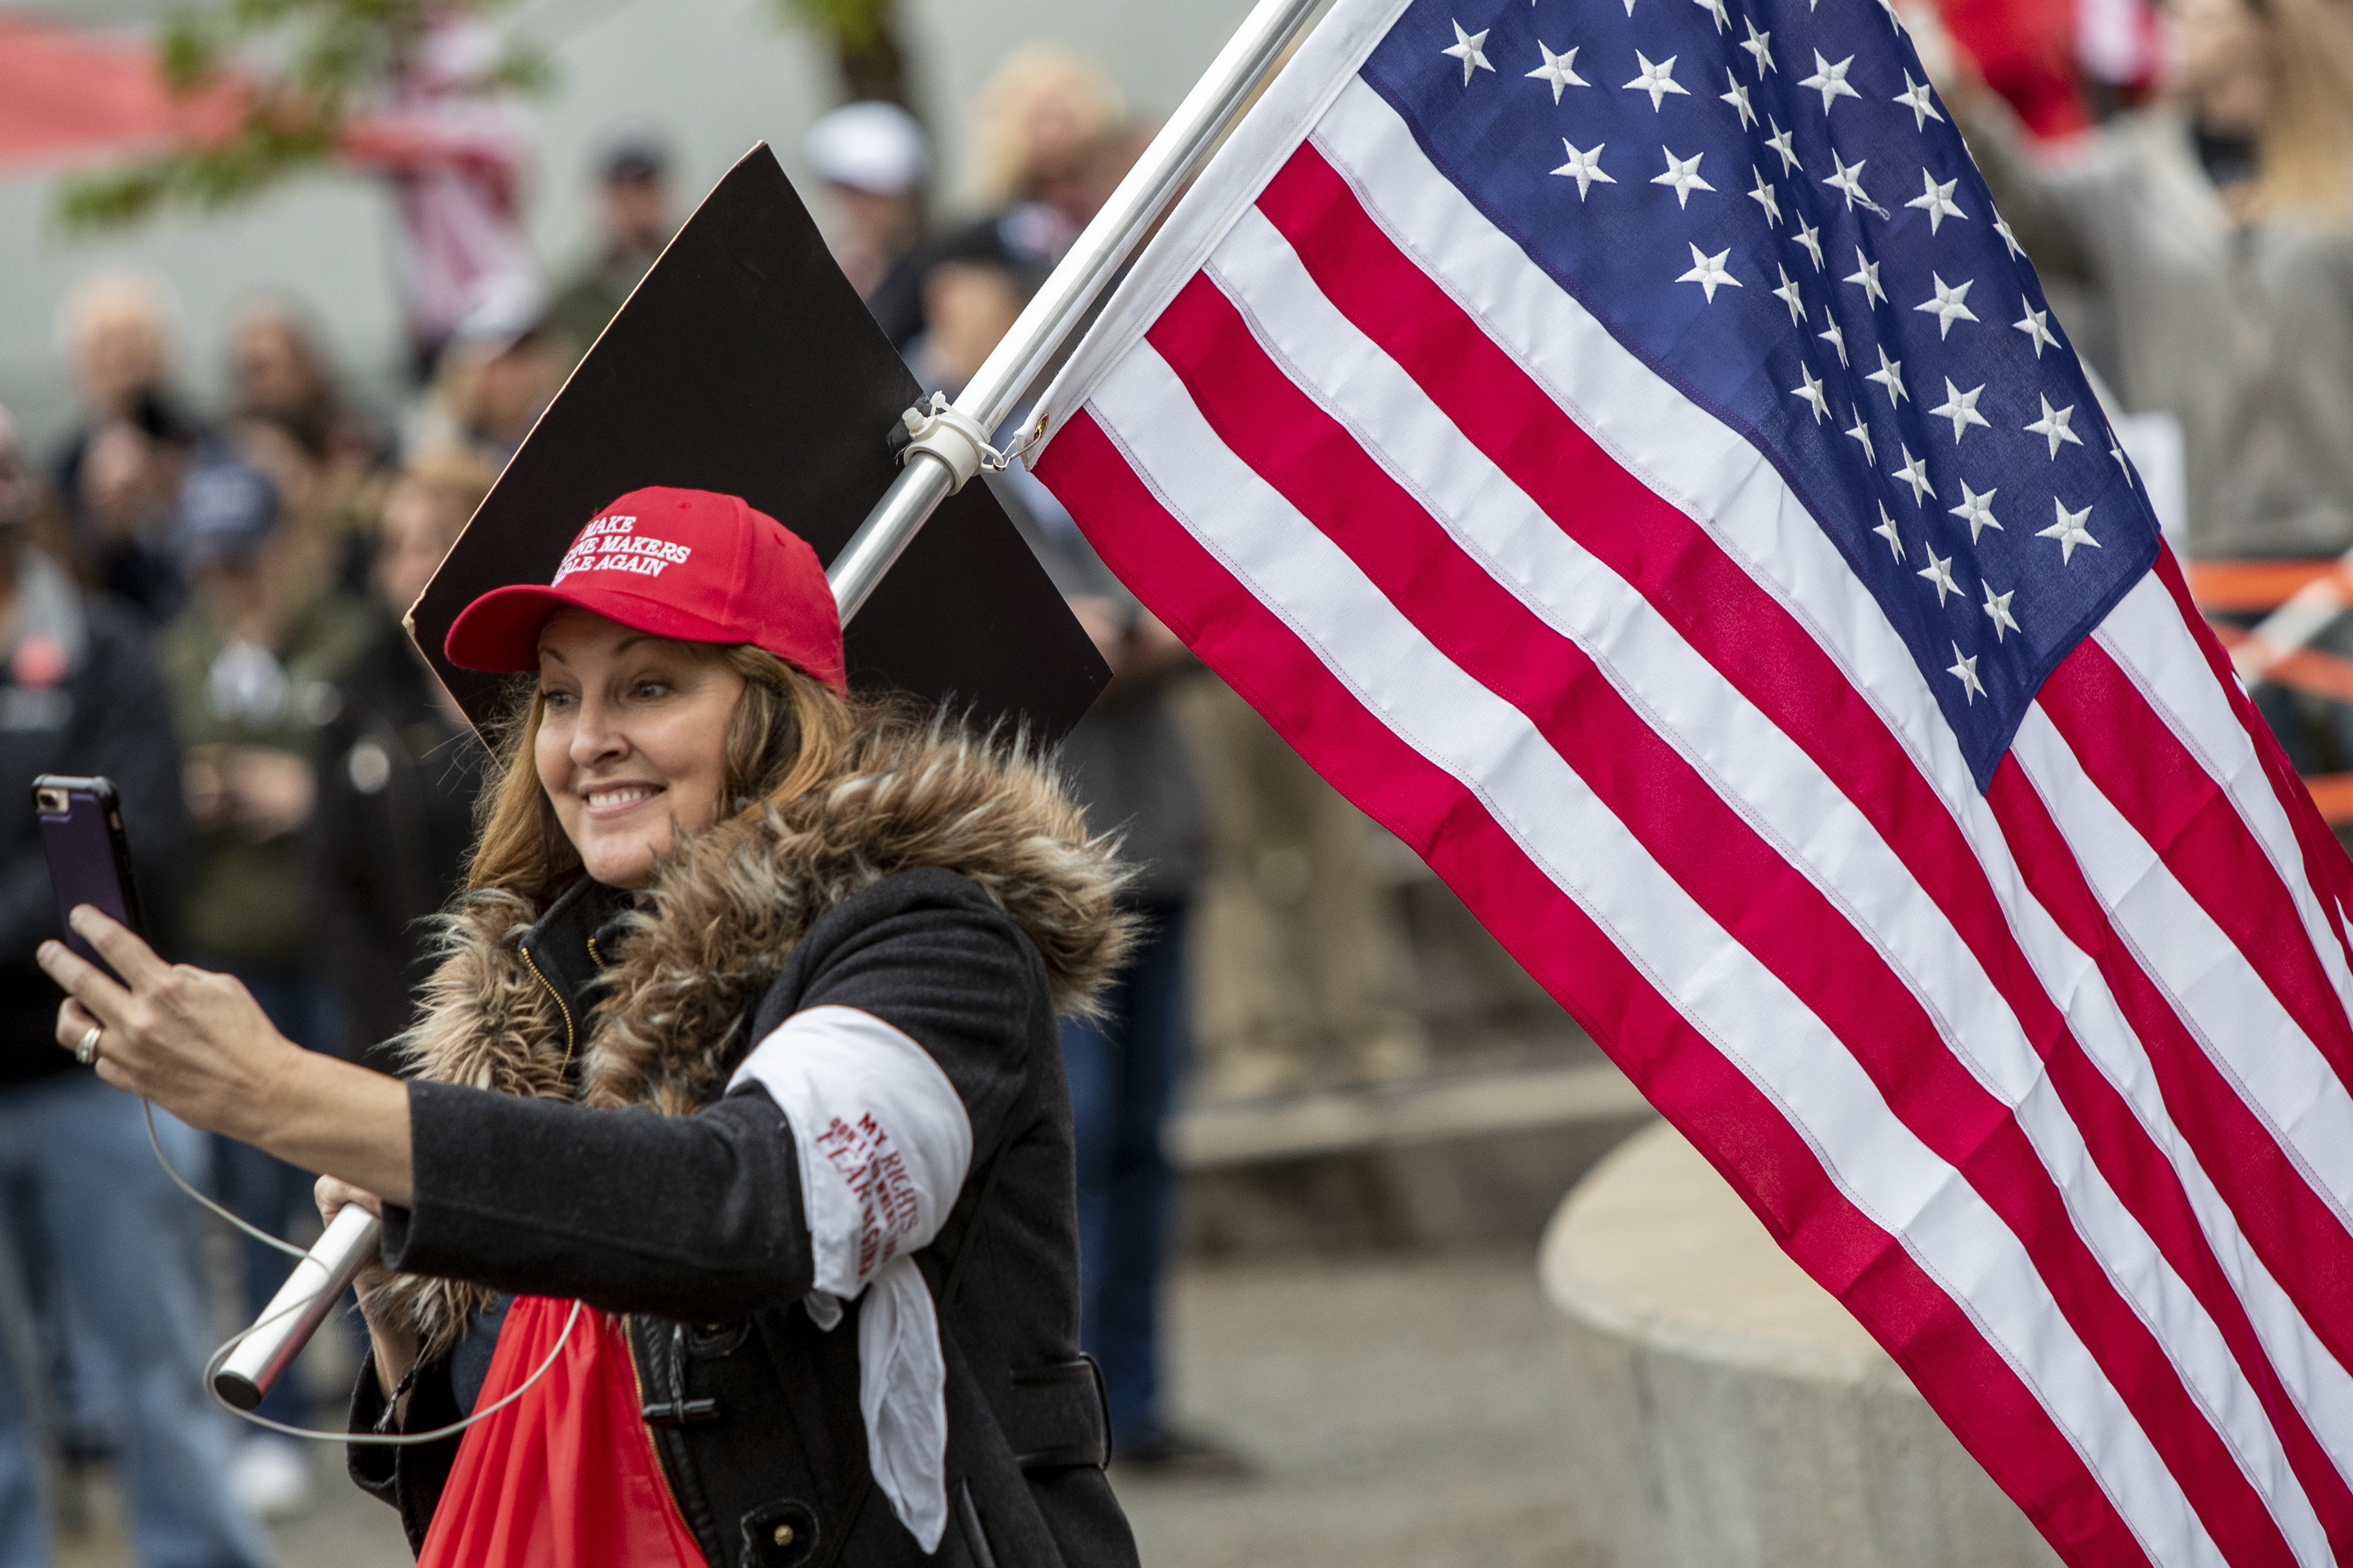 A crowd gathers for the "American Patriot Rally-Sheriffs speak out" event at Rosa Parks Circle in downtown Grand Rapids on Monday, May 18, 2020. The crowd is protesting against Gov. Gretchen Whitmer's stay-at-home order. (Cory Morse | MLive.com)